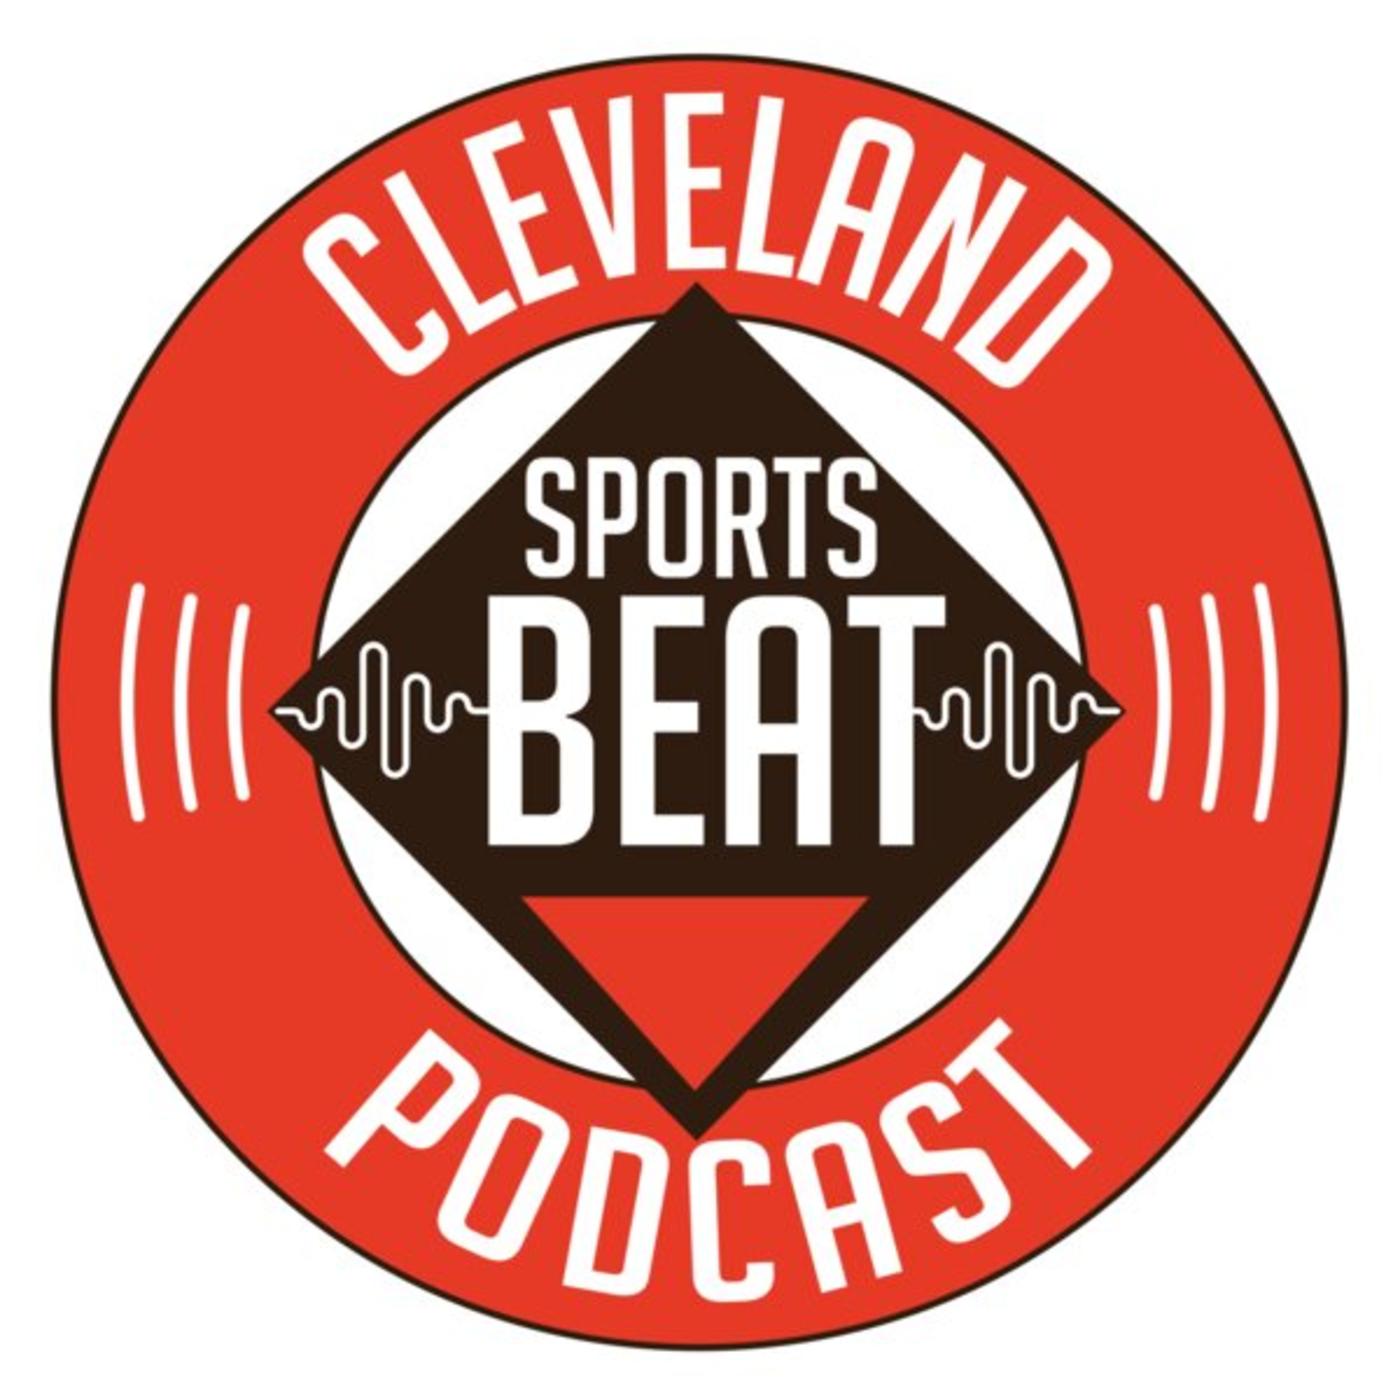 Cleveland Sports Beat - The Browns, Indians and more